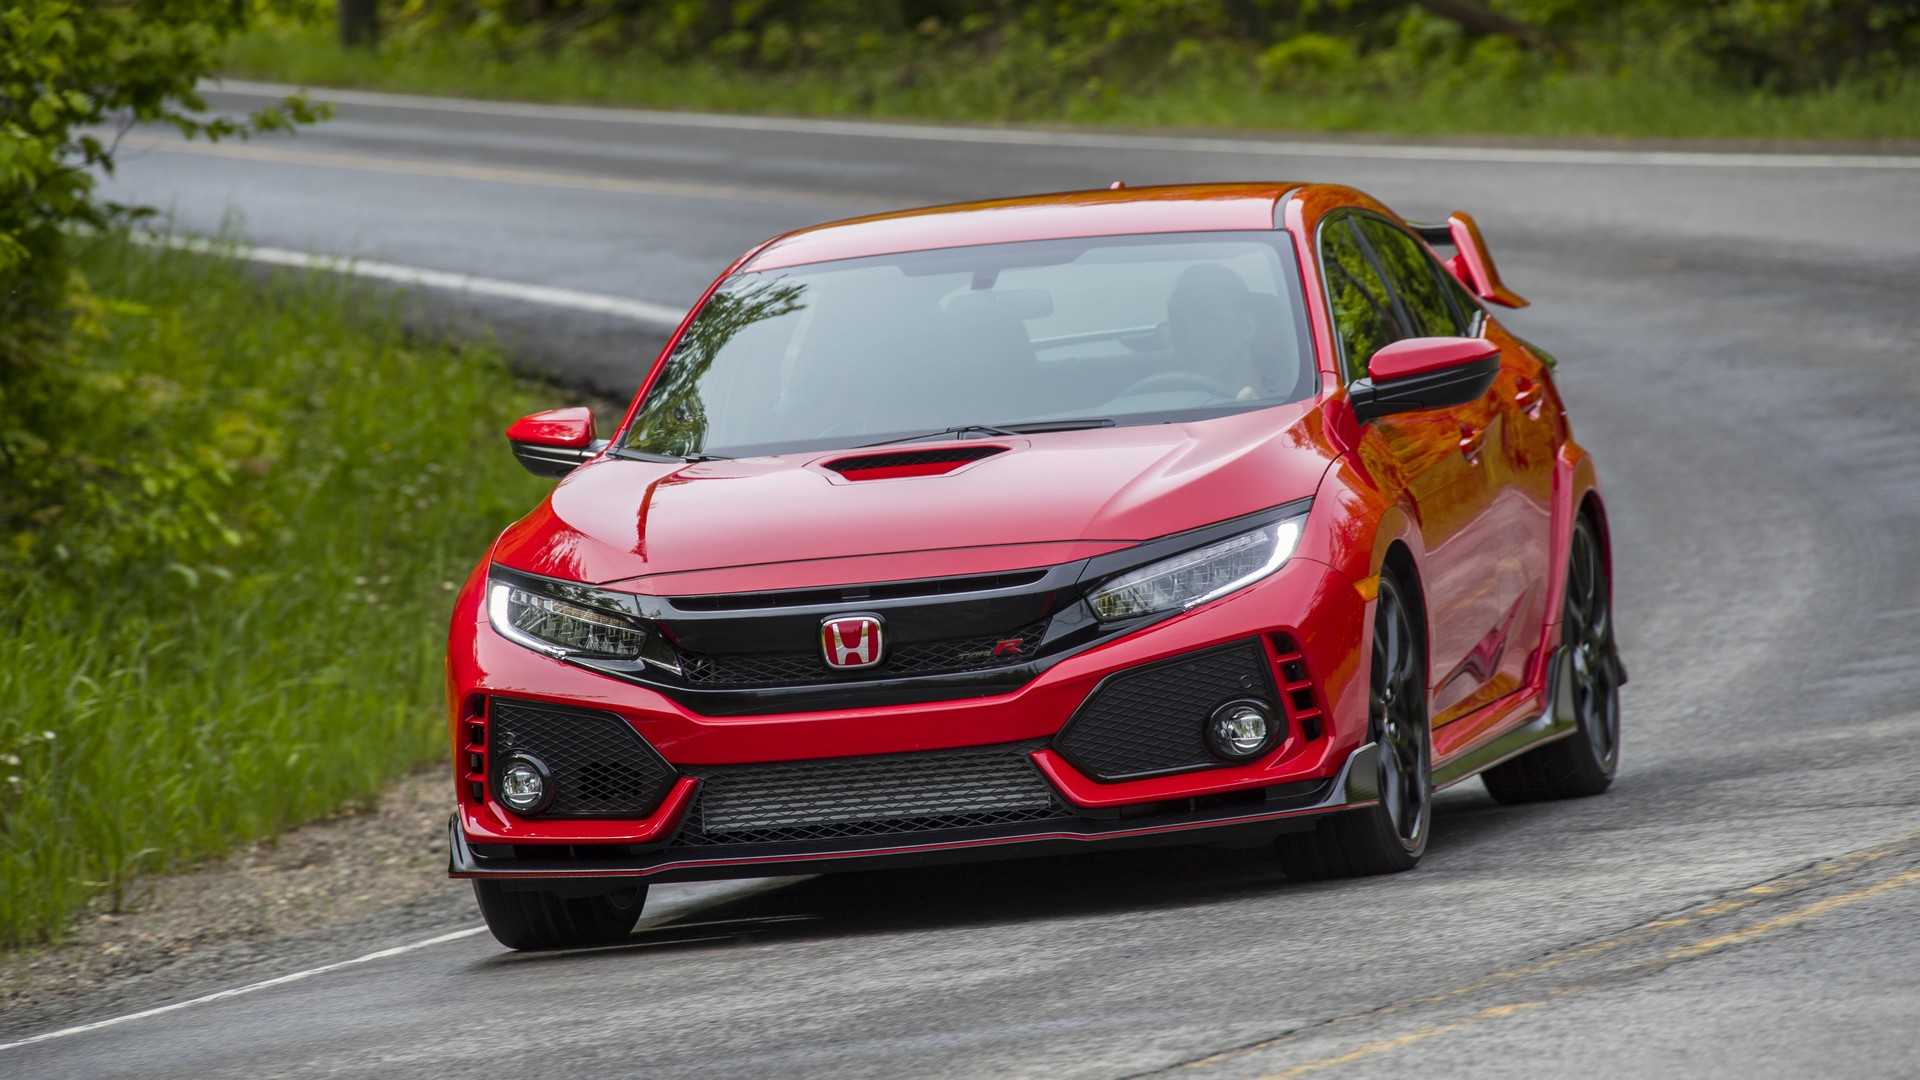 The New 2019 Honda Civic Hatchback Specs And Review Review